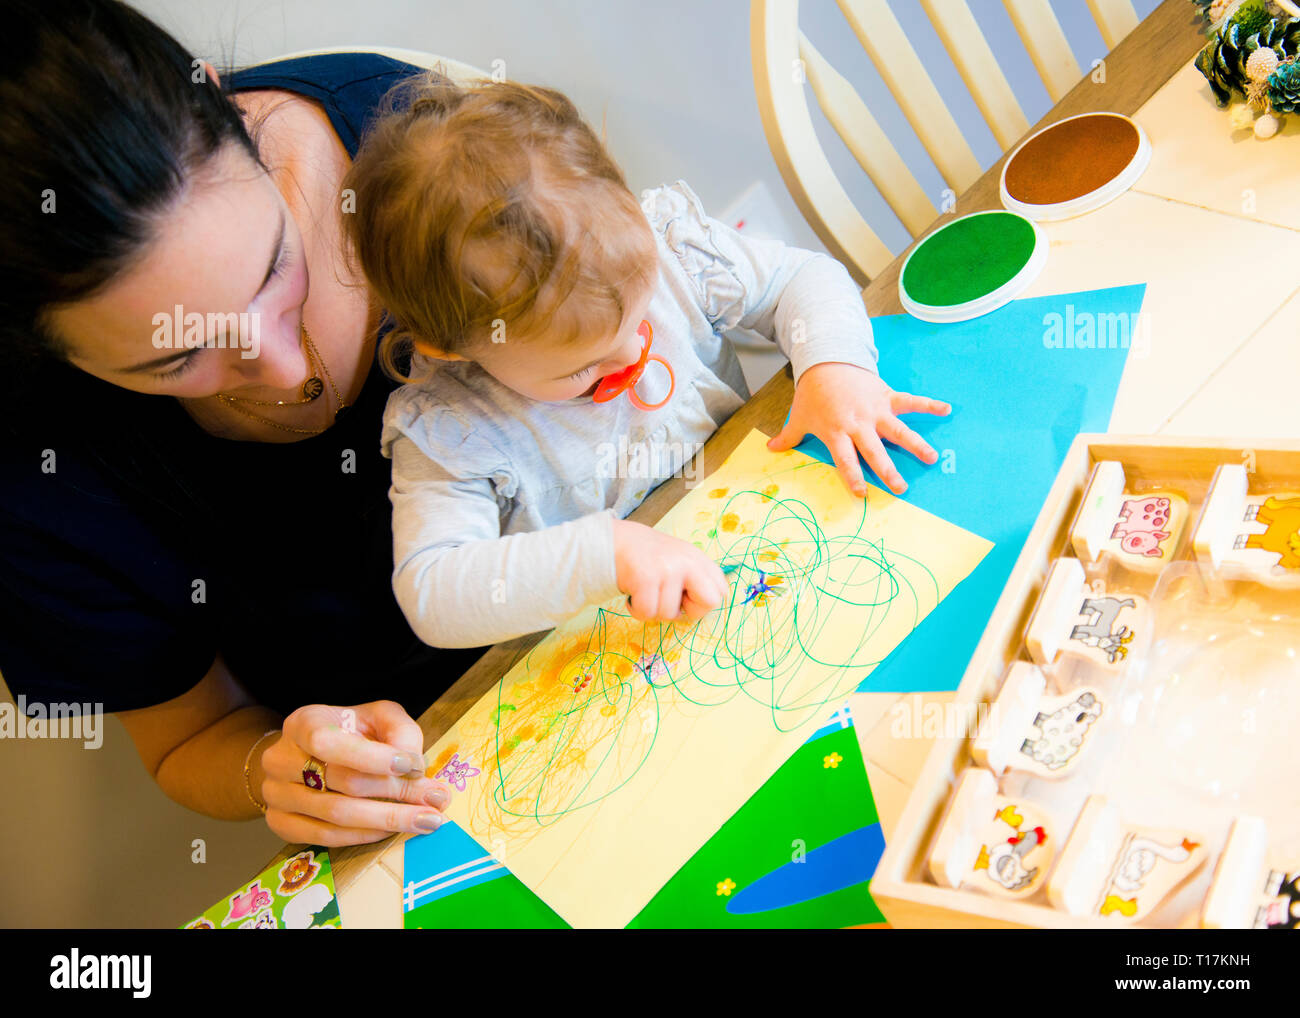 High angle view of mother assisting young daughter to express her artistic self on too colored paper, sitting at the kitchen table. Stock Photo